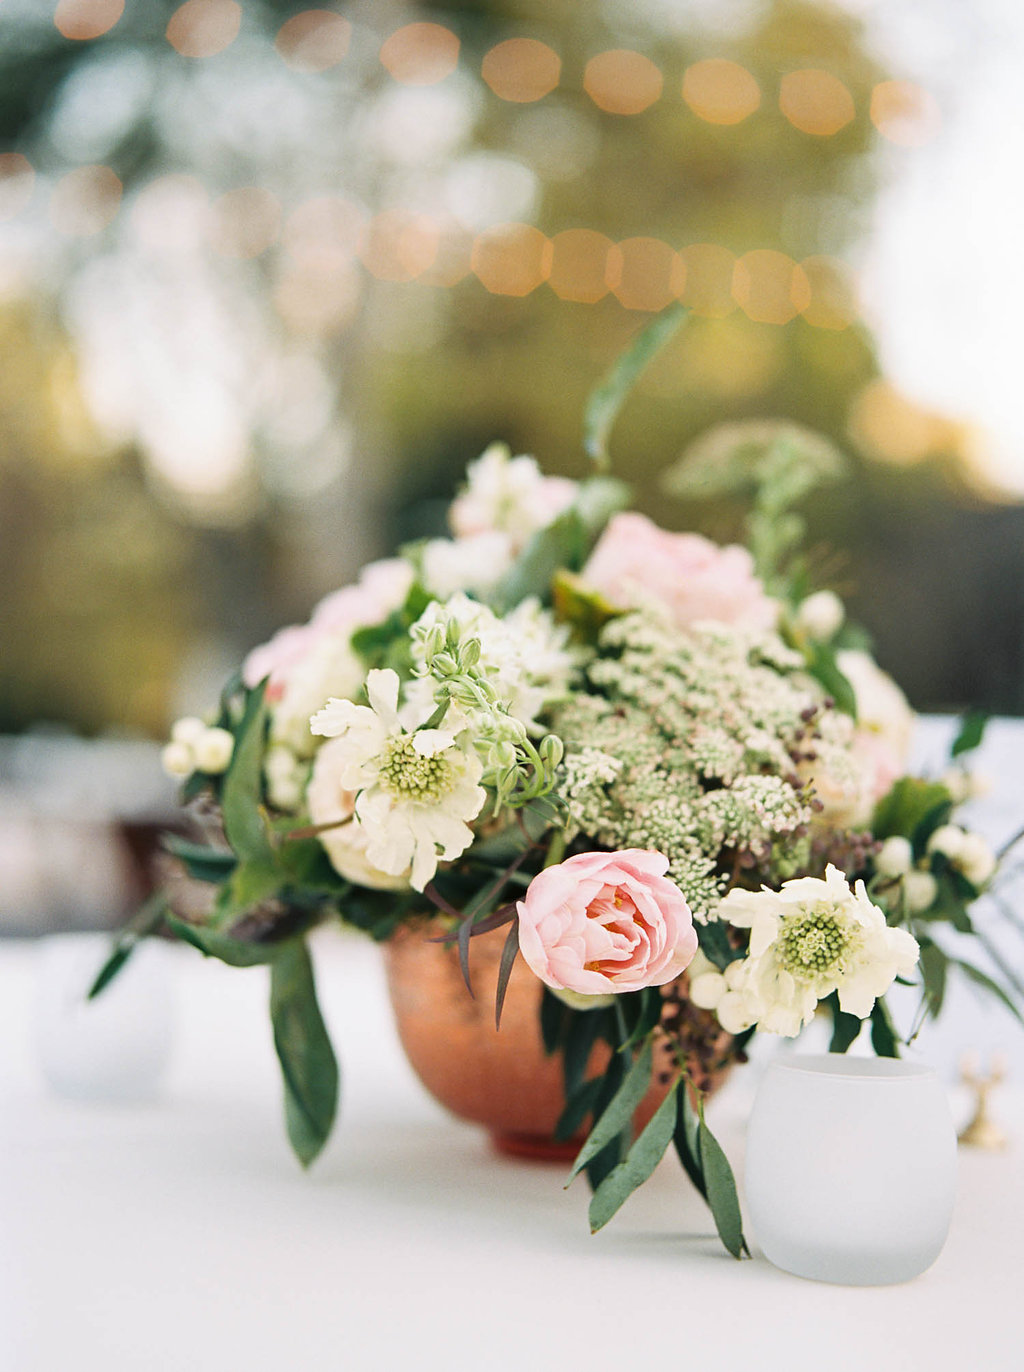 Cheekwood Botanical Garden Wedding // Blush and greenery centerpiece with garden roses, Queen Anne's Lace, and jasmine